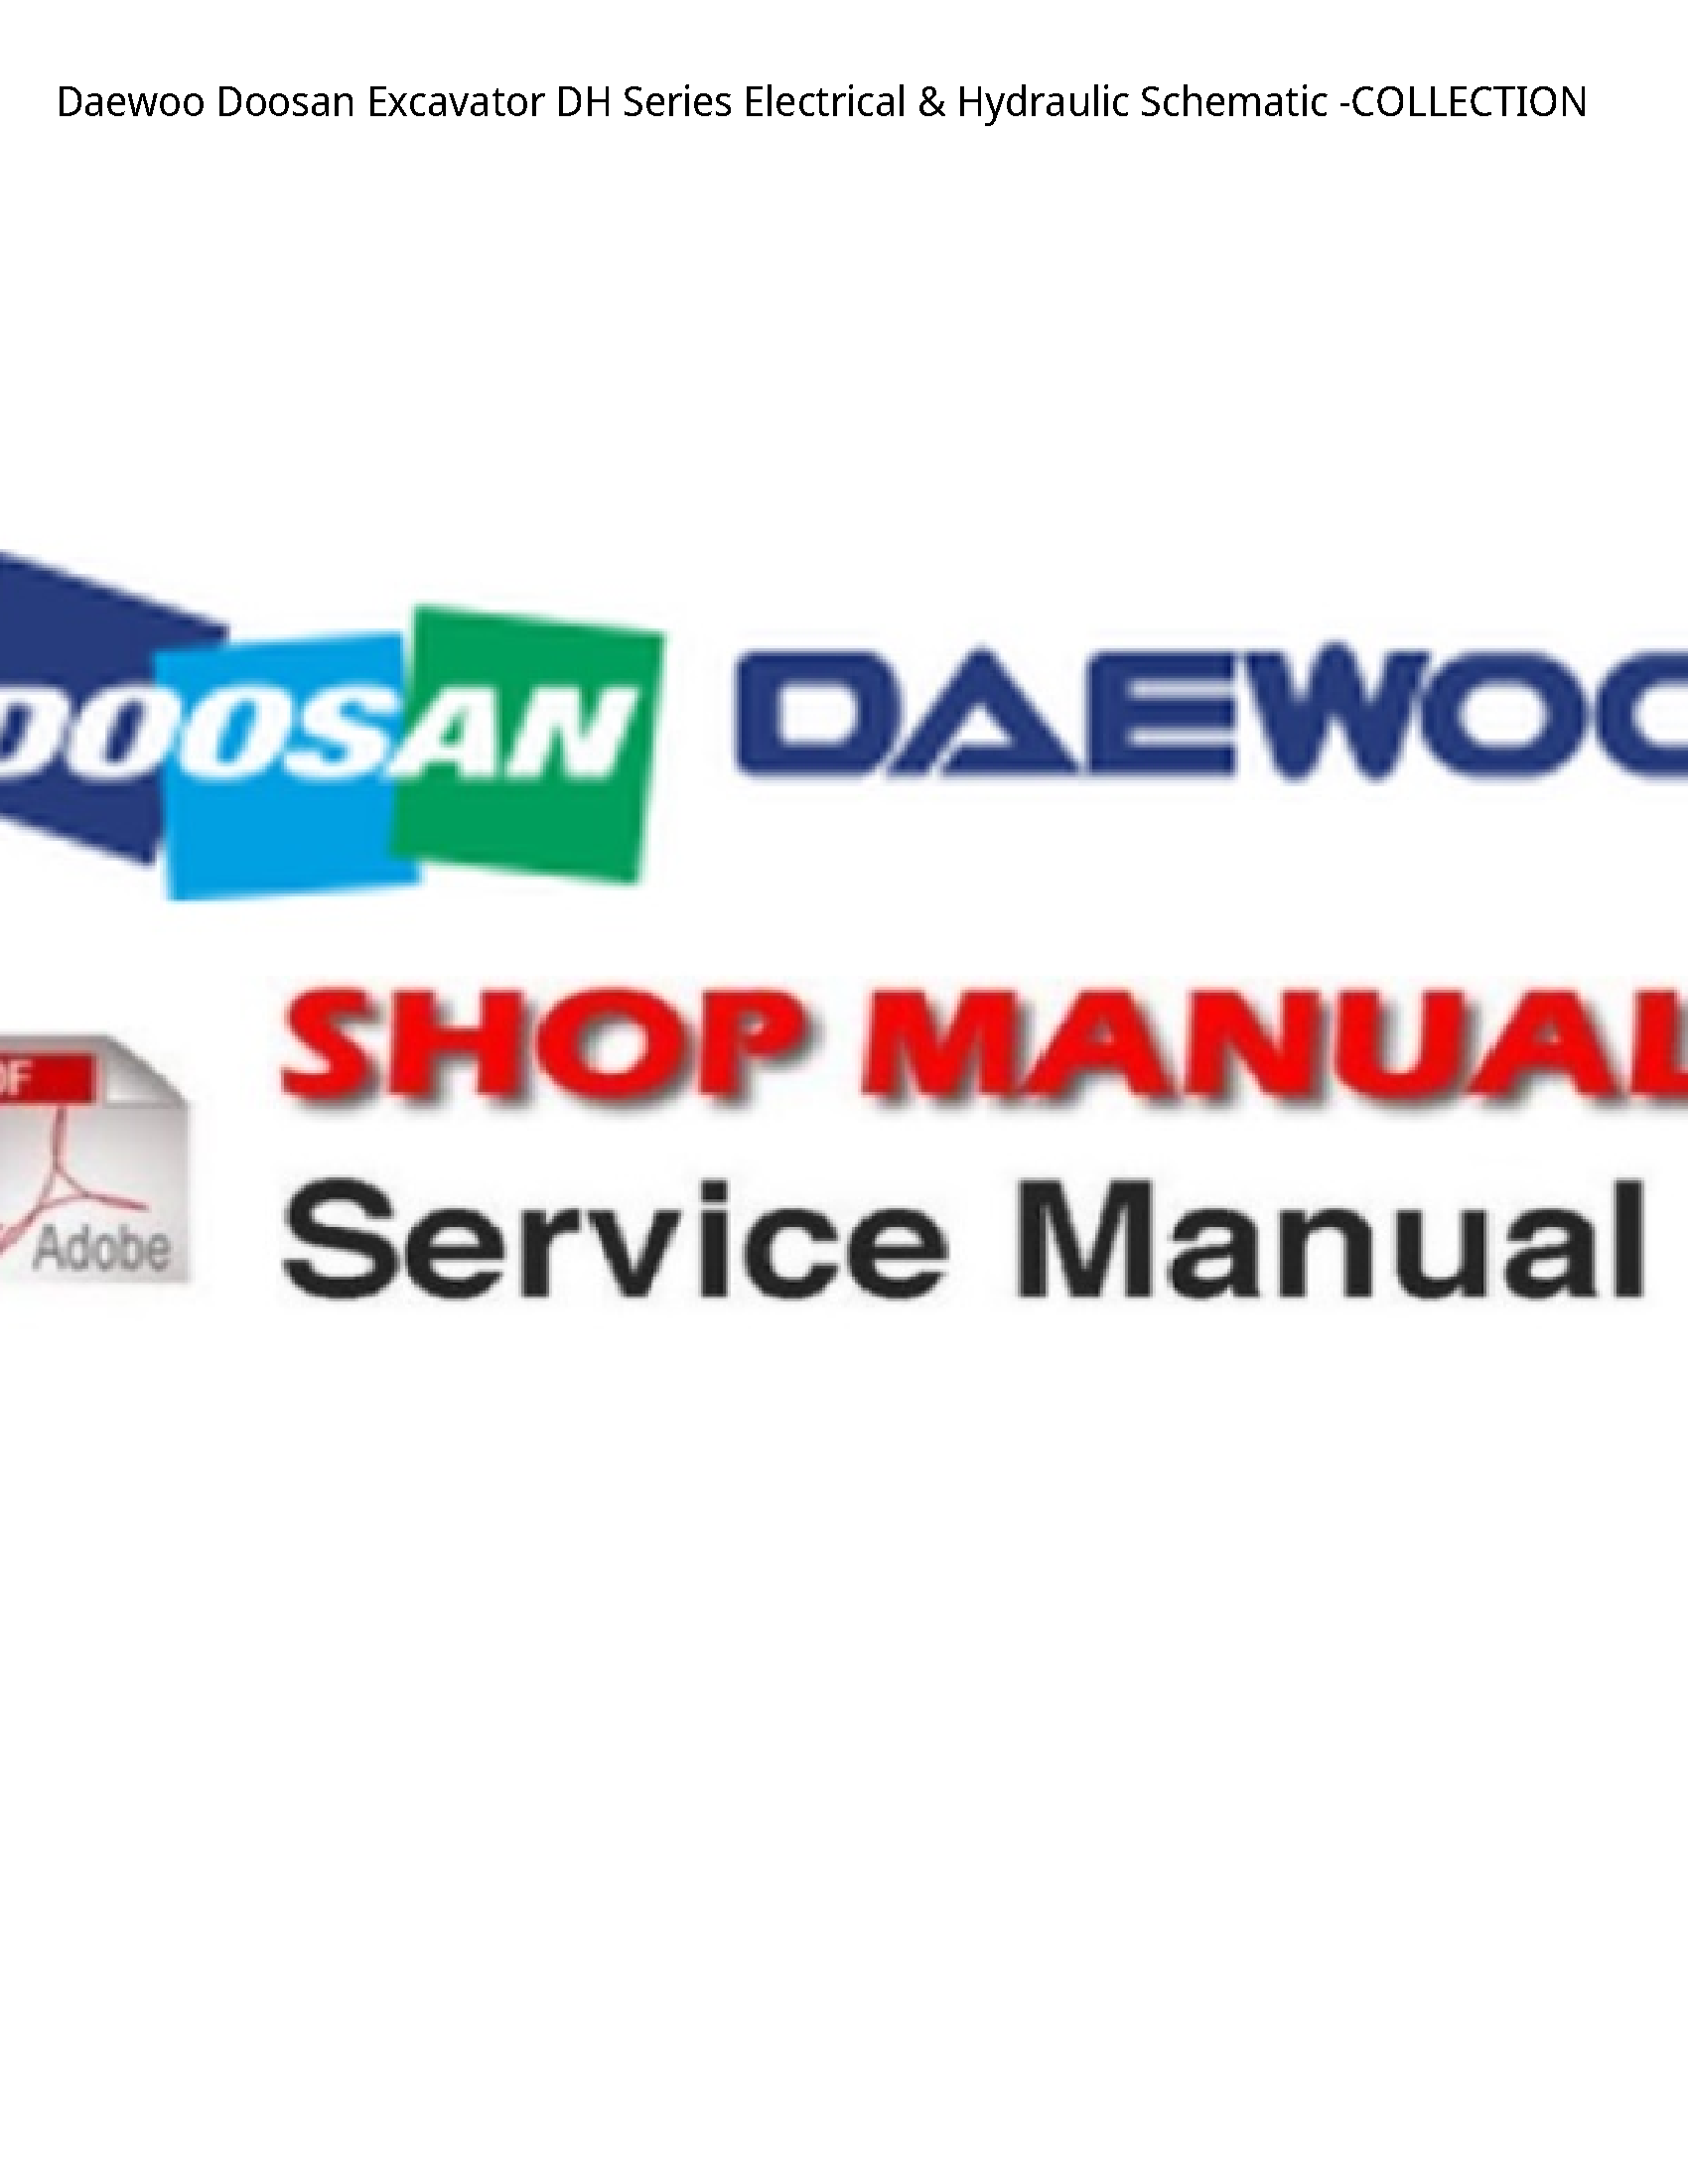 Daewoo Doosan Excavator DH Series Electrical Hydraulic Schematic -COLLECTION manual